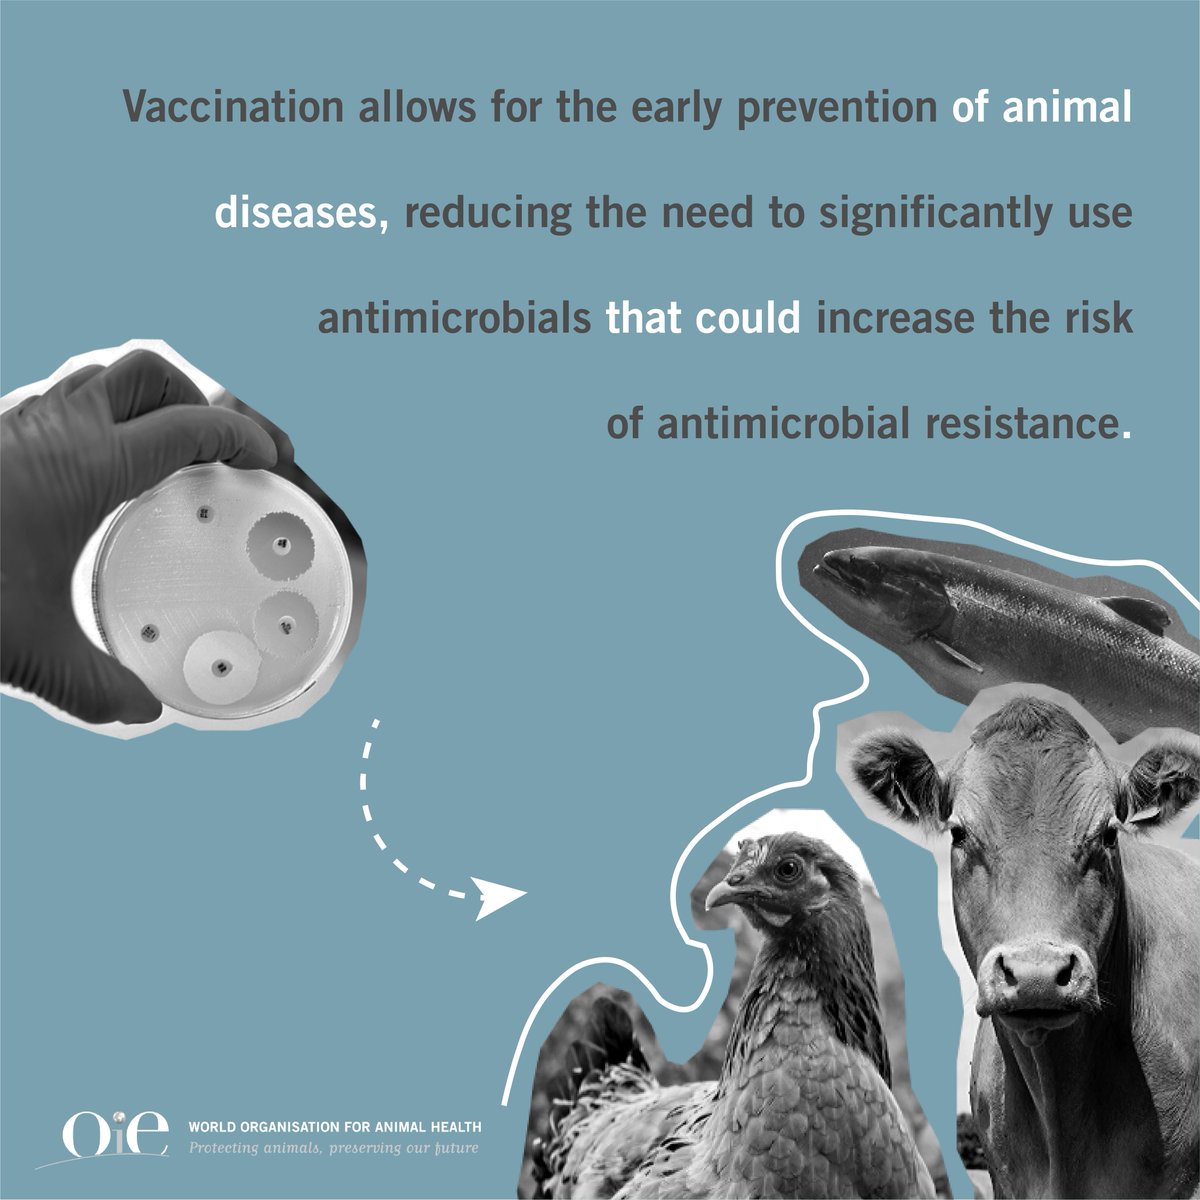 Ways to reduce the rise of 🦠 #AntiMicrobialResistance 🦠:

⭕️ Use the recommended dosage regiment, treatment length & withdrawal period of #antimicrobials.

⭕️ Vaccinate your animals to prevent diseases.

#WAAW2021